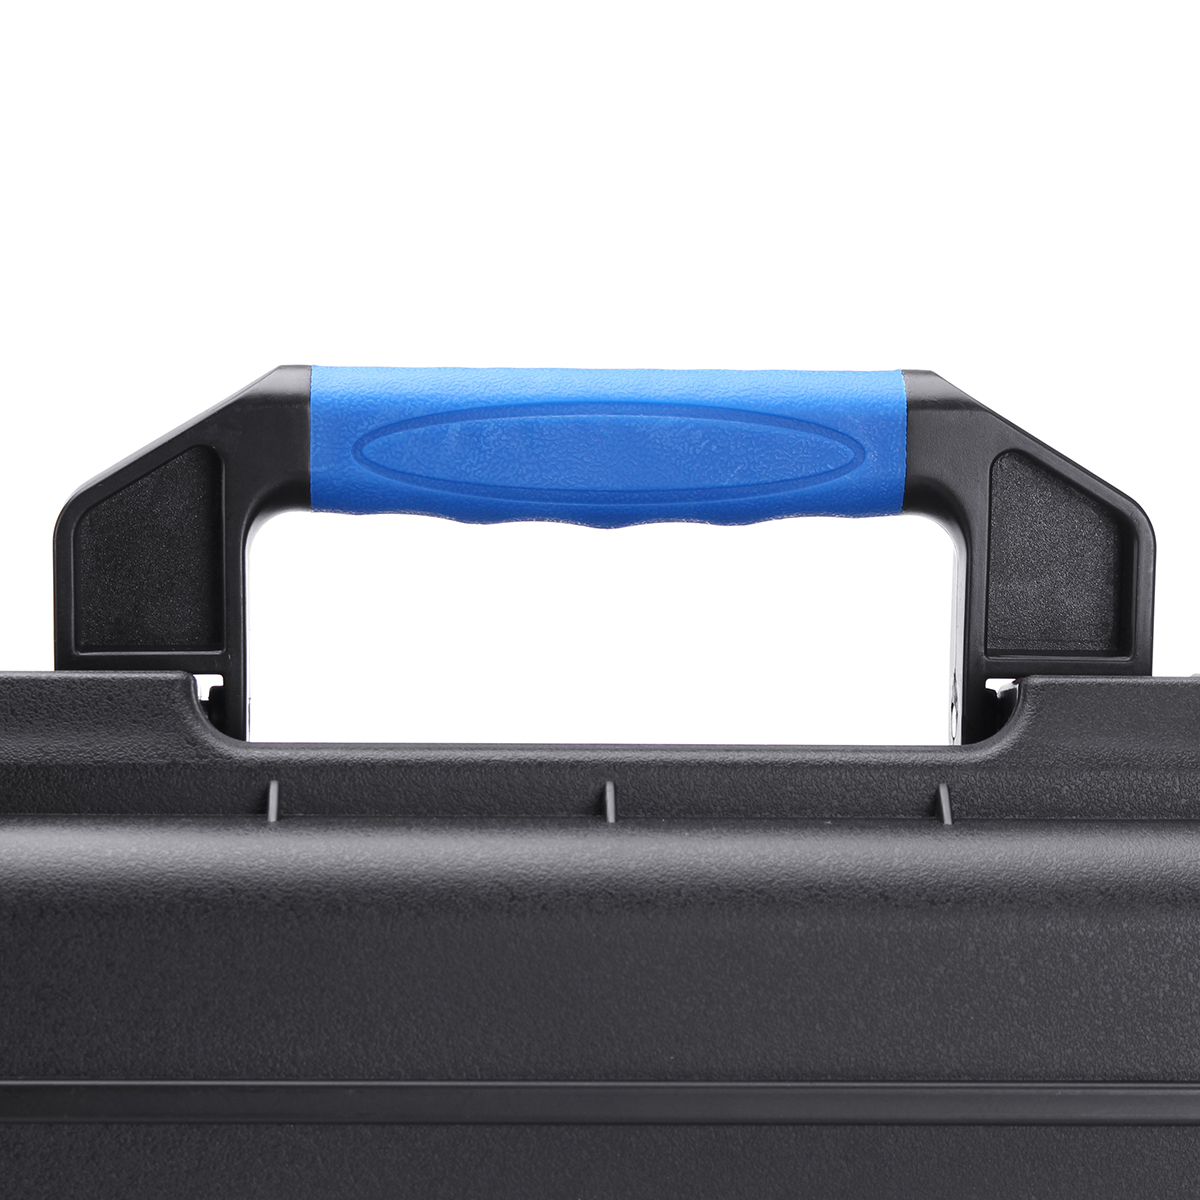 Waterproof-Hard-Carry-Case-Tool-Kits-Impact-Resistant-Shockproof-Storage-Box-Safety-Hardware-toolbox-1665199-6